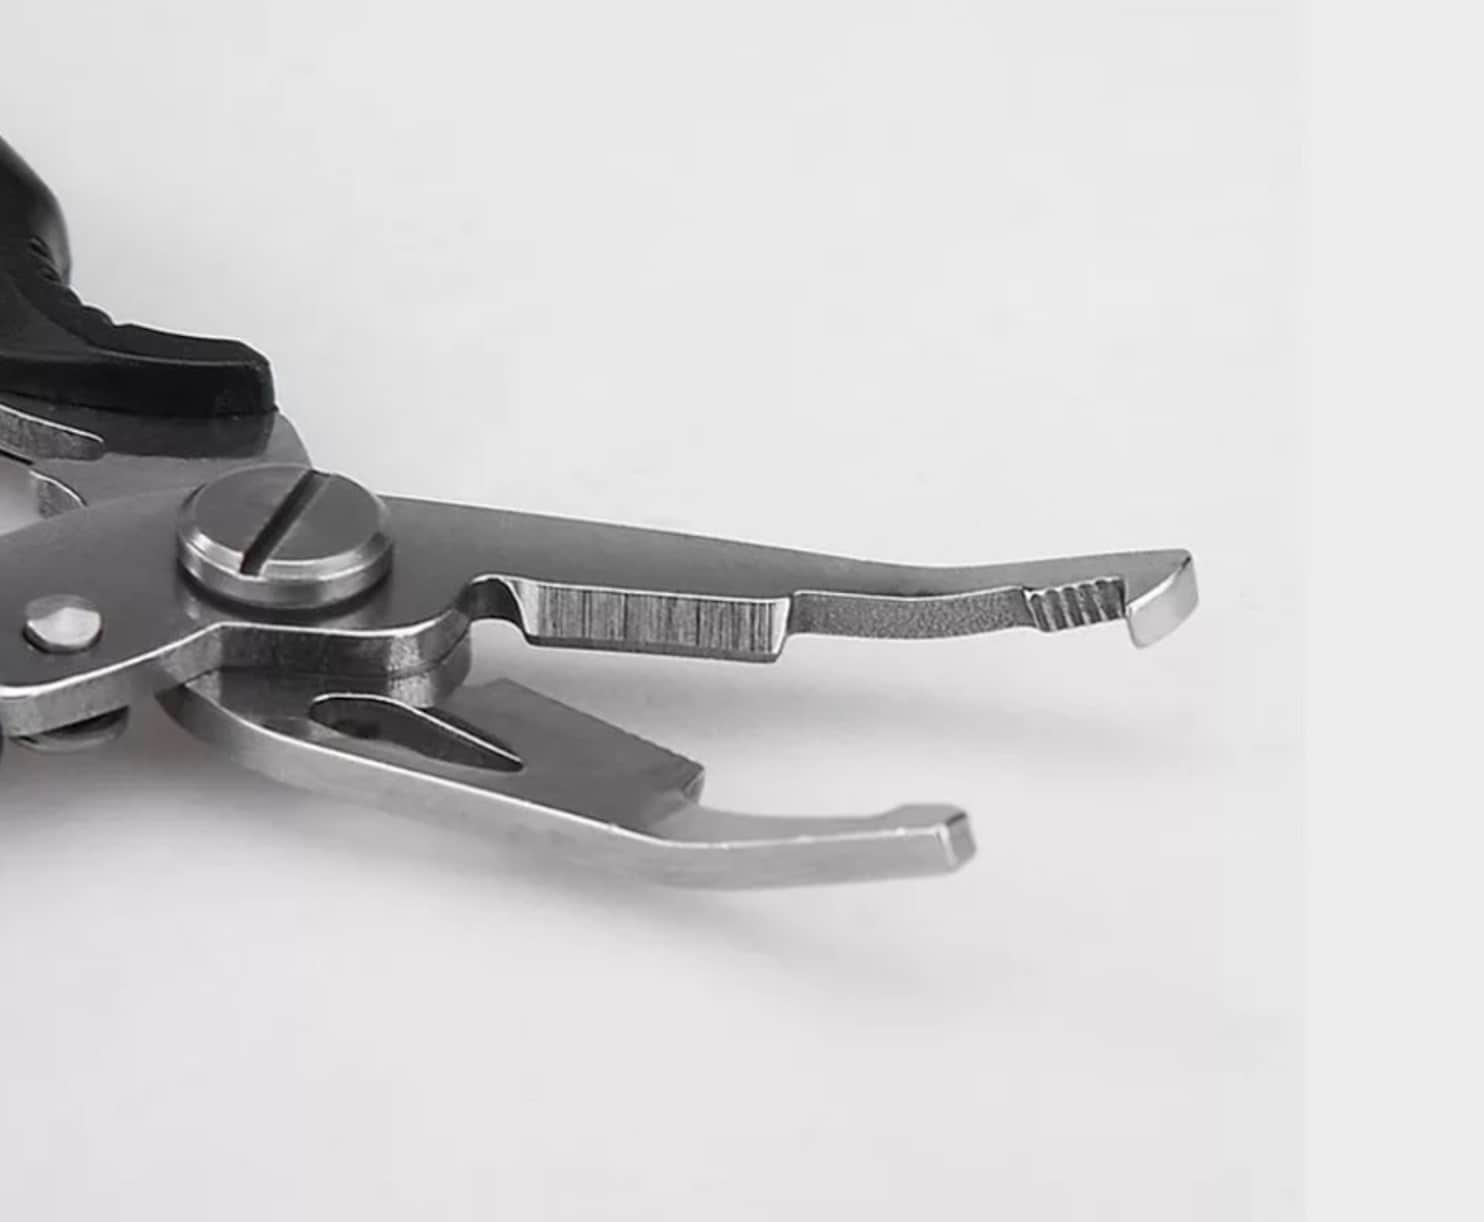 Fishing Solutions Fishing Pliers That Offer 4 Essential Fishing Functions in A Compact Design. Includes A Holster That Can Be Fixed to A Belt or